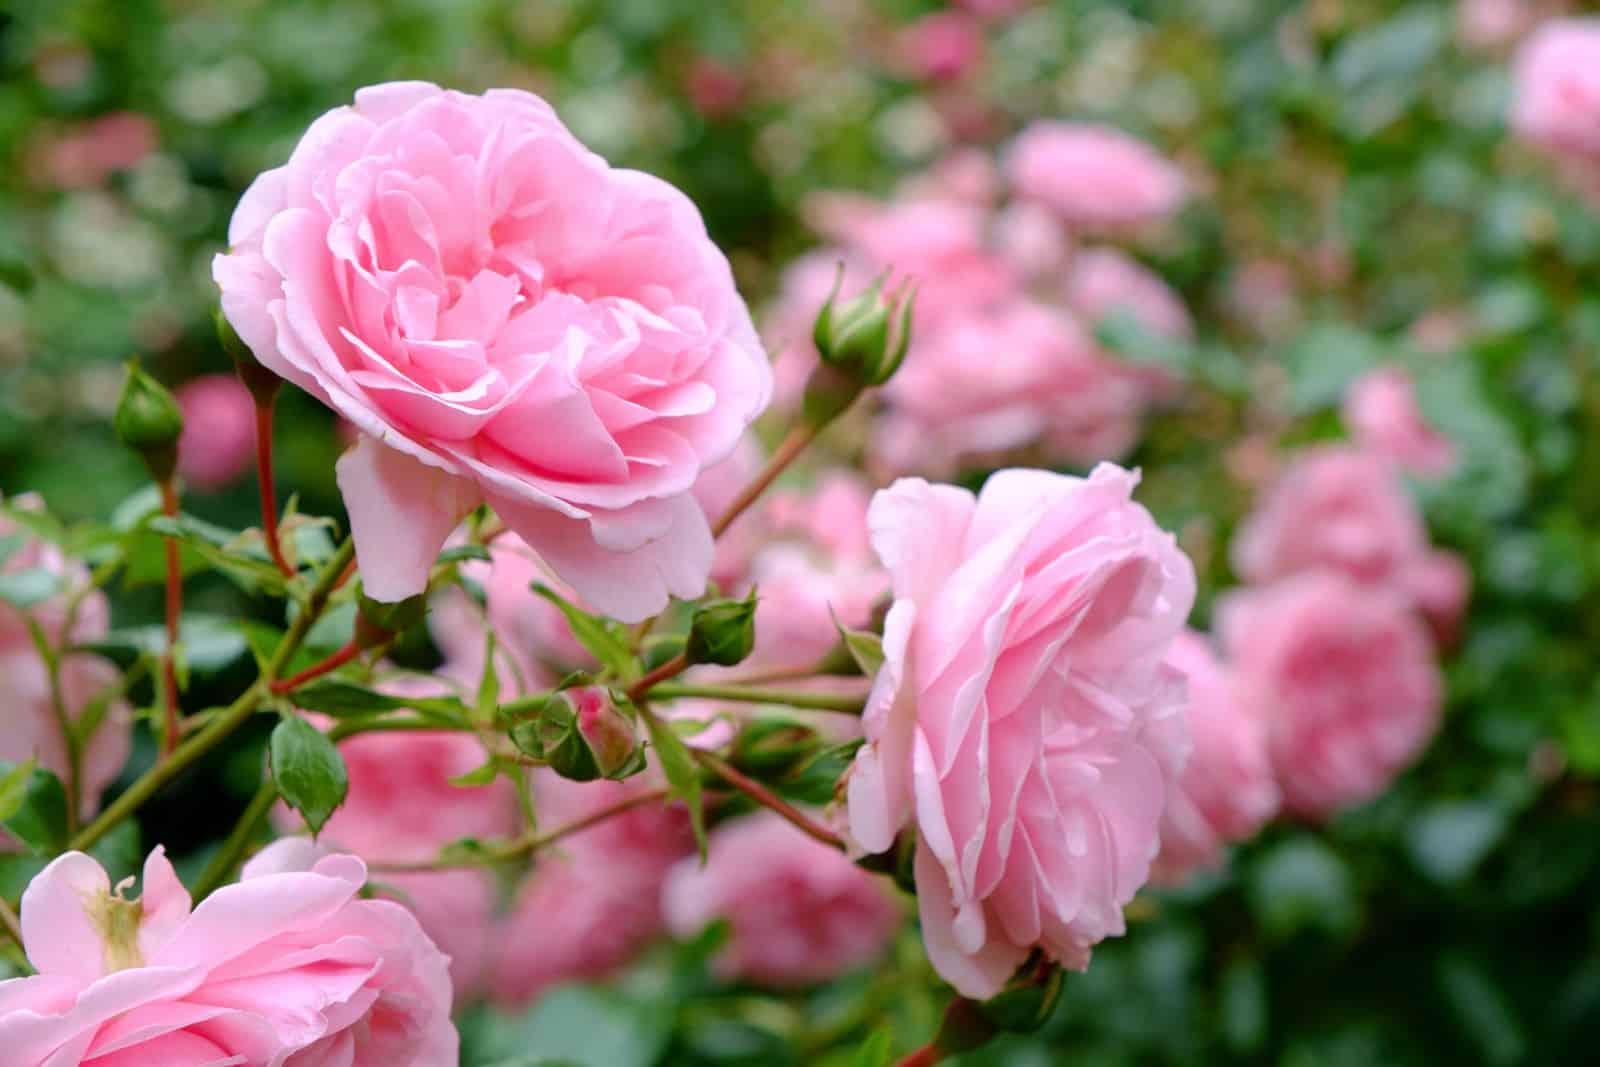 tips for growing healthy roses like this pink rose